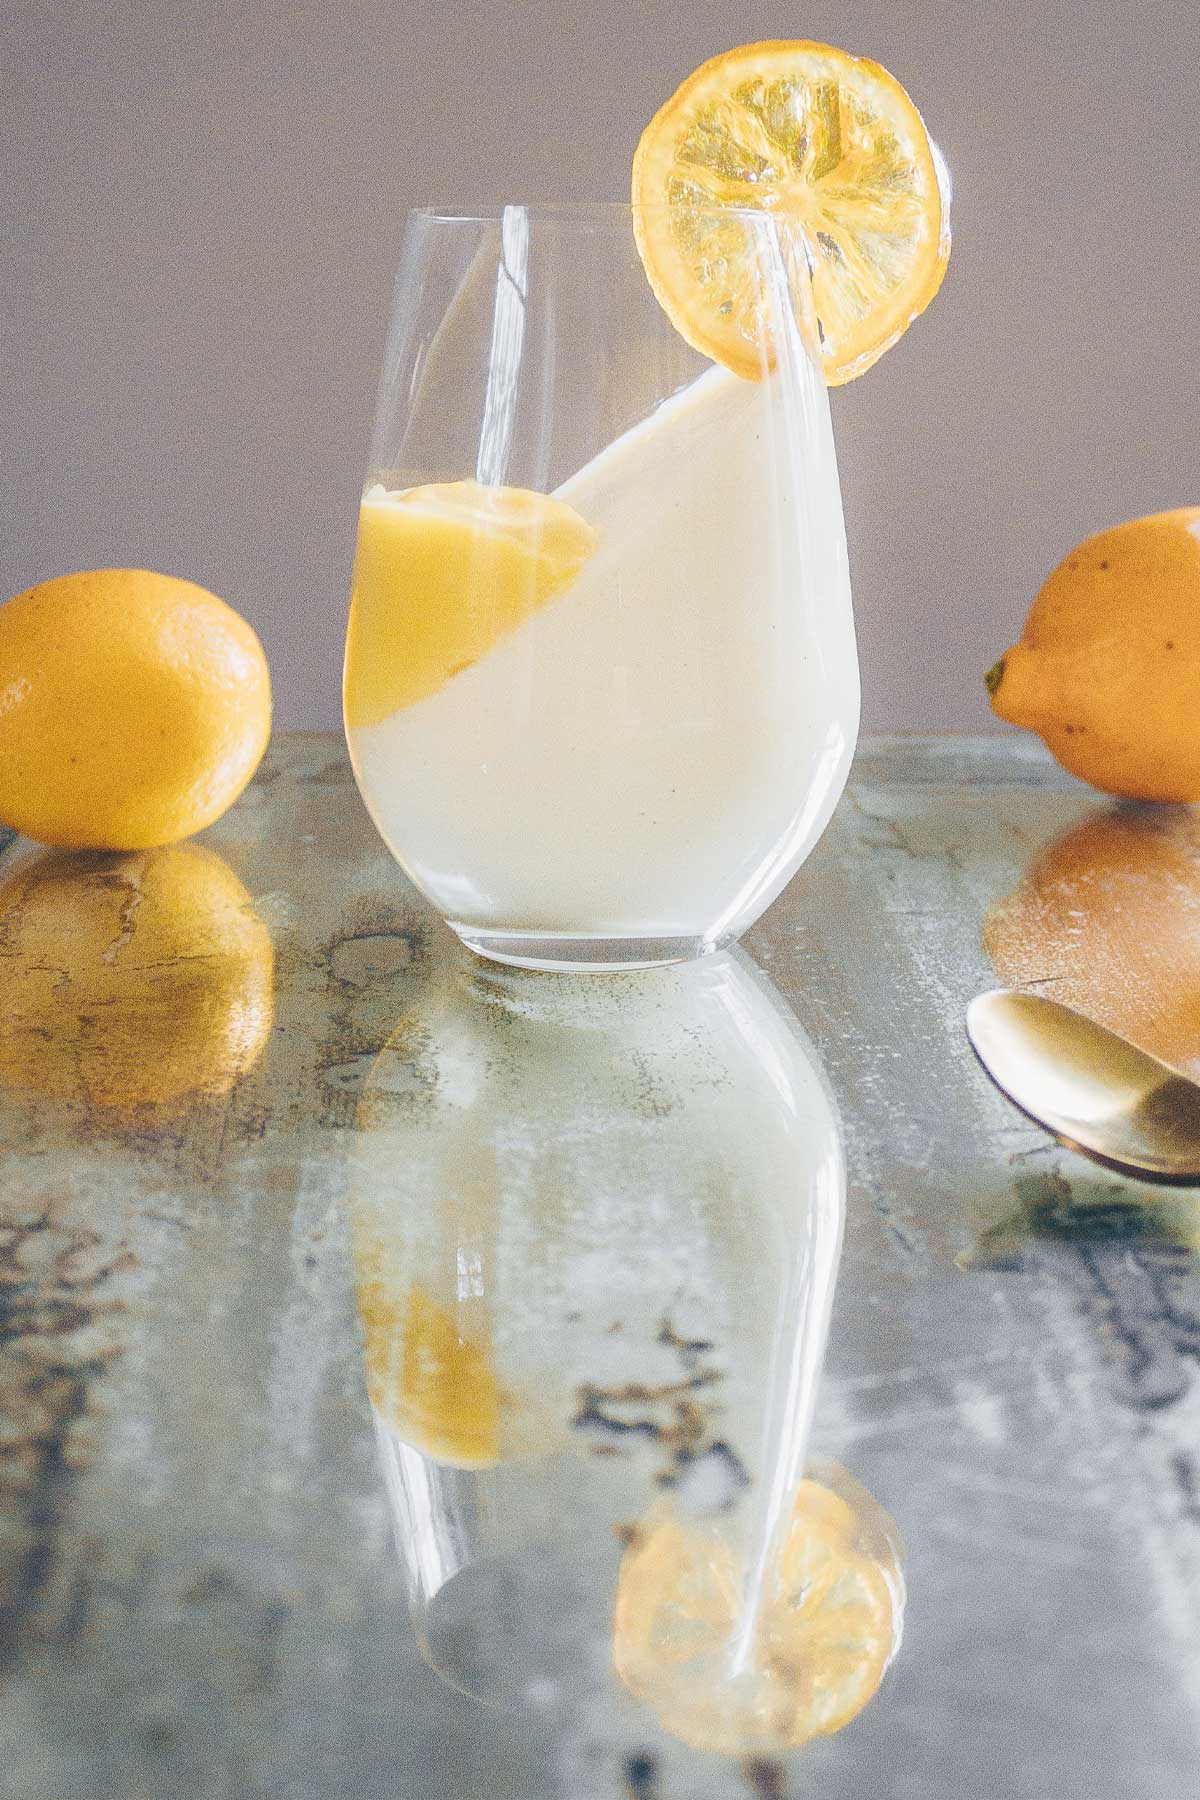 An antiqued mirrored table with a stemless wine glass filled with Yogurt Pannacotta at an angle with a well of Meyer lemon curd on the side and a candied lemon on the rim.